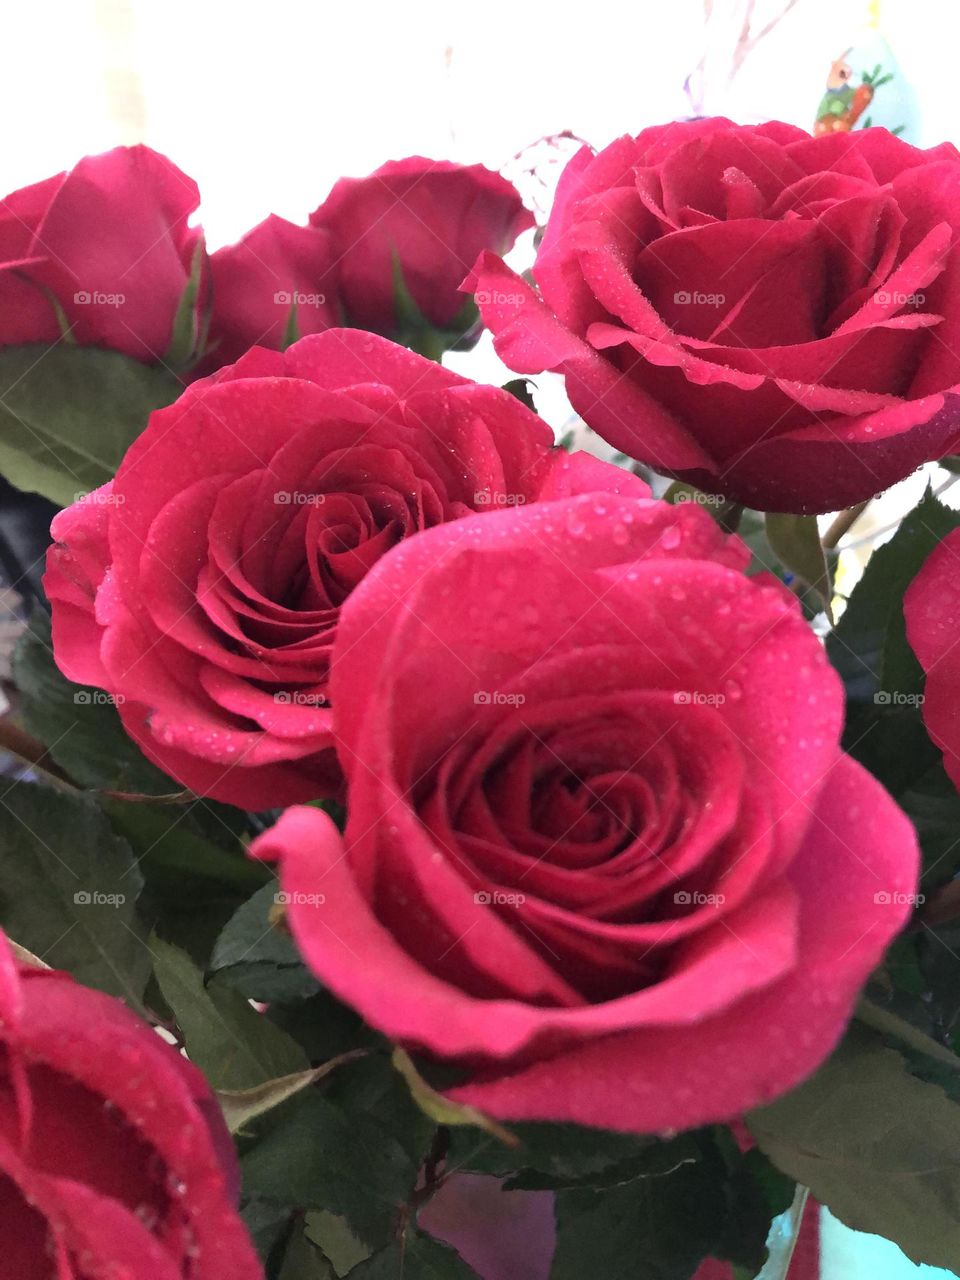 Close up with the armed Roses 🌹